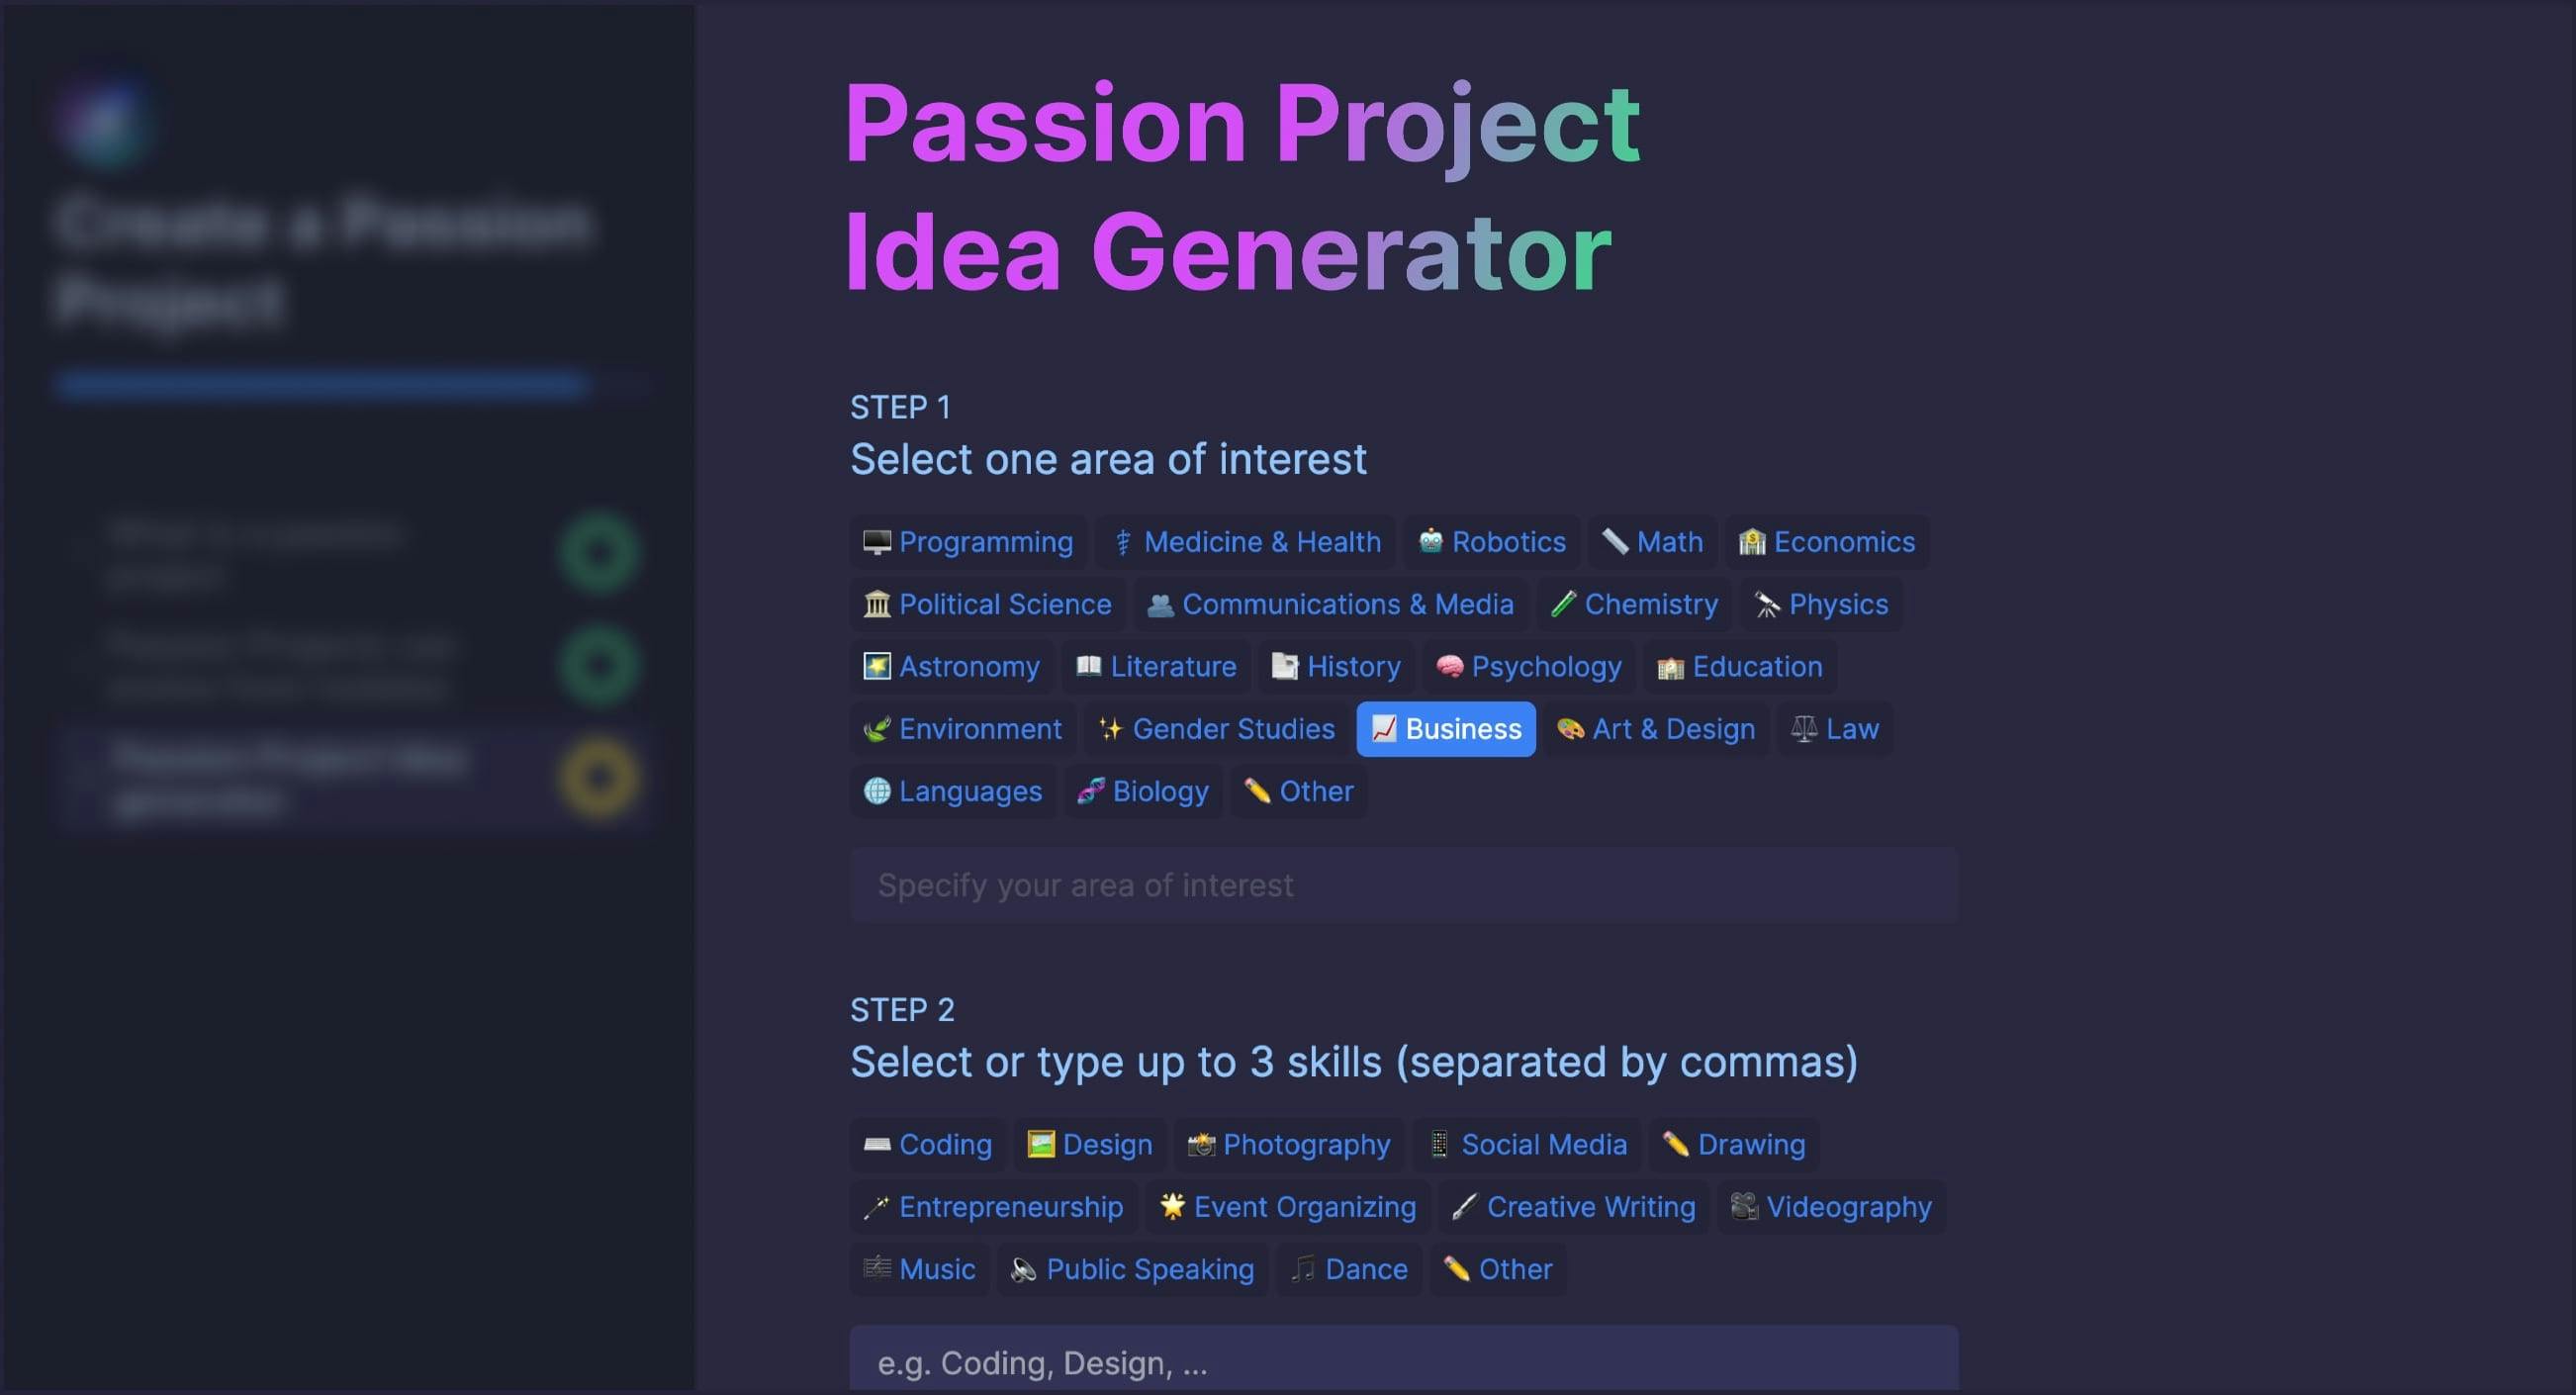 Passion Project Ideas